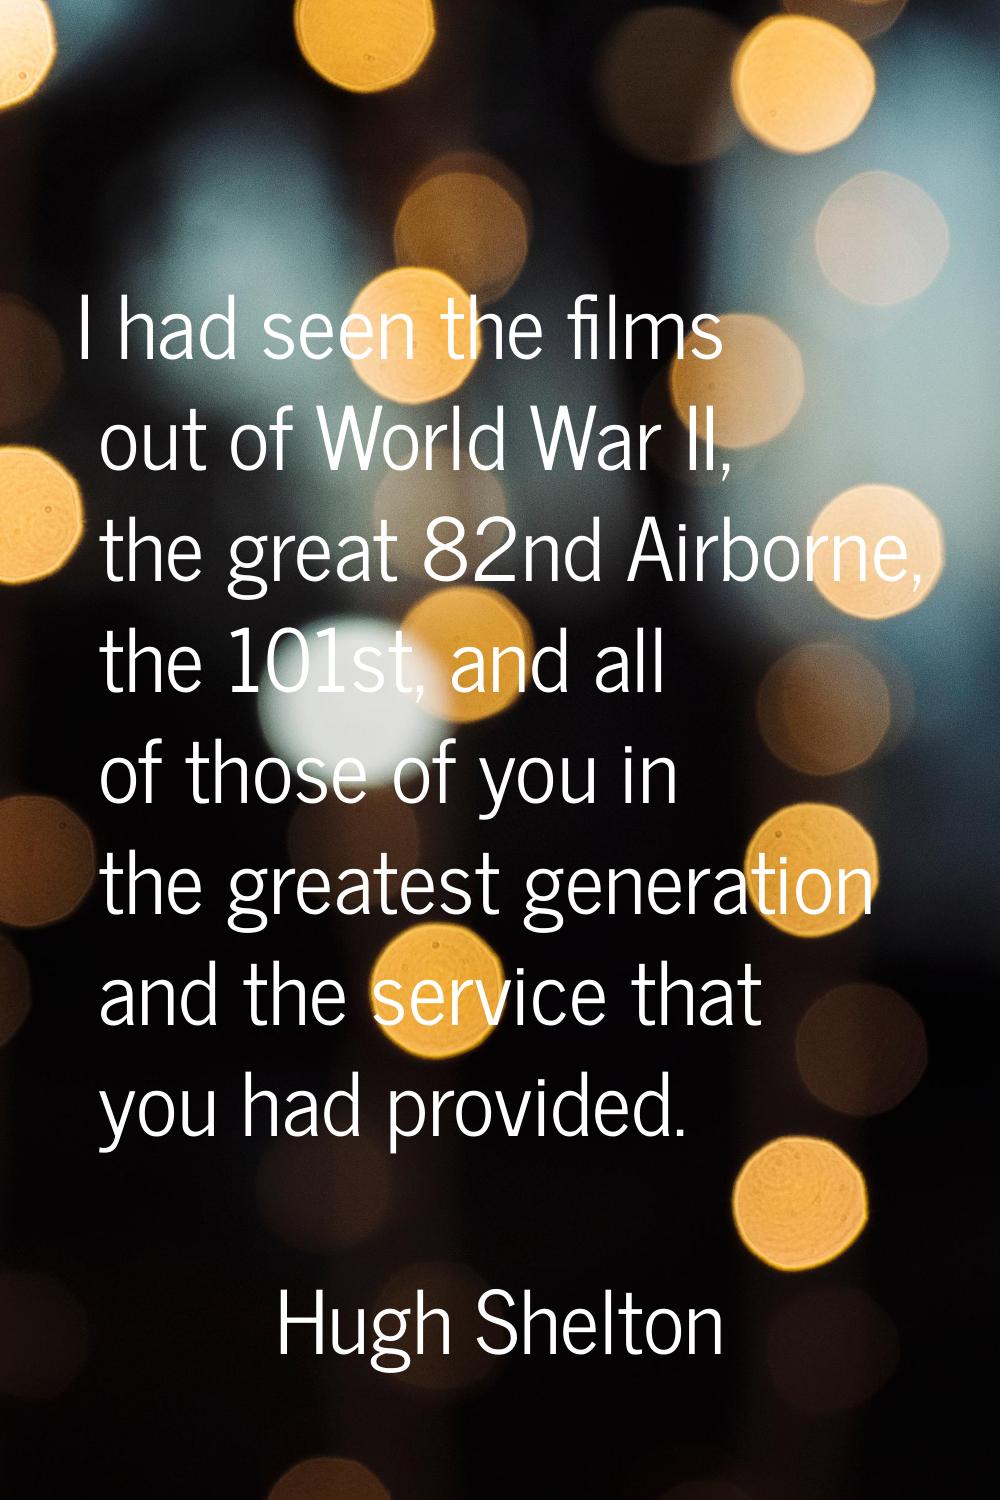 I had seen the films out of World War II, the great 82nd Airborne, the 101st, and all of those of y